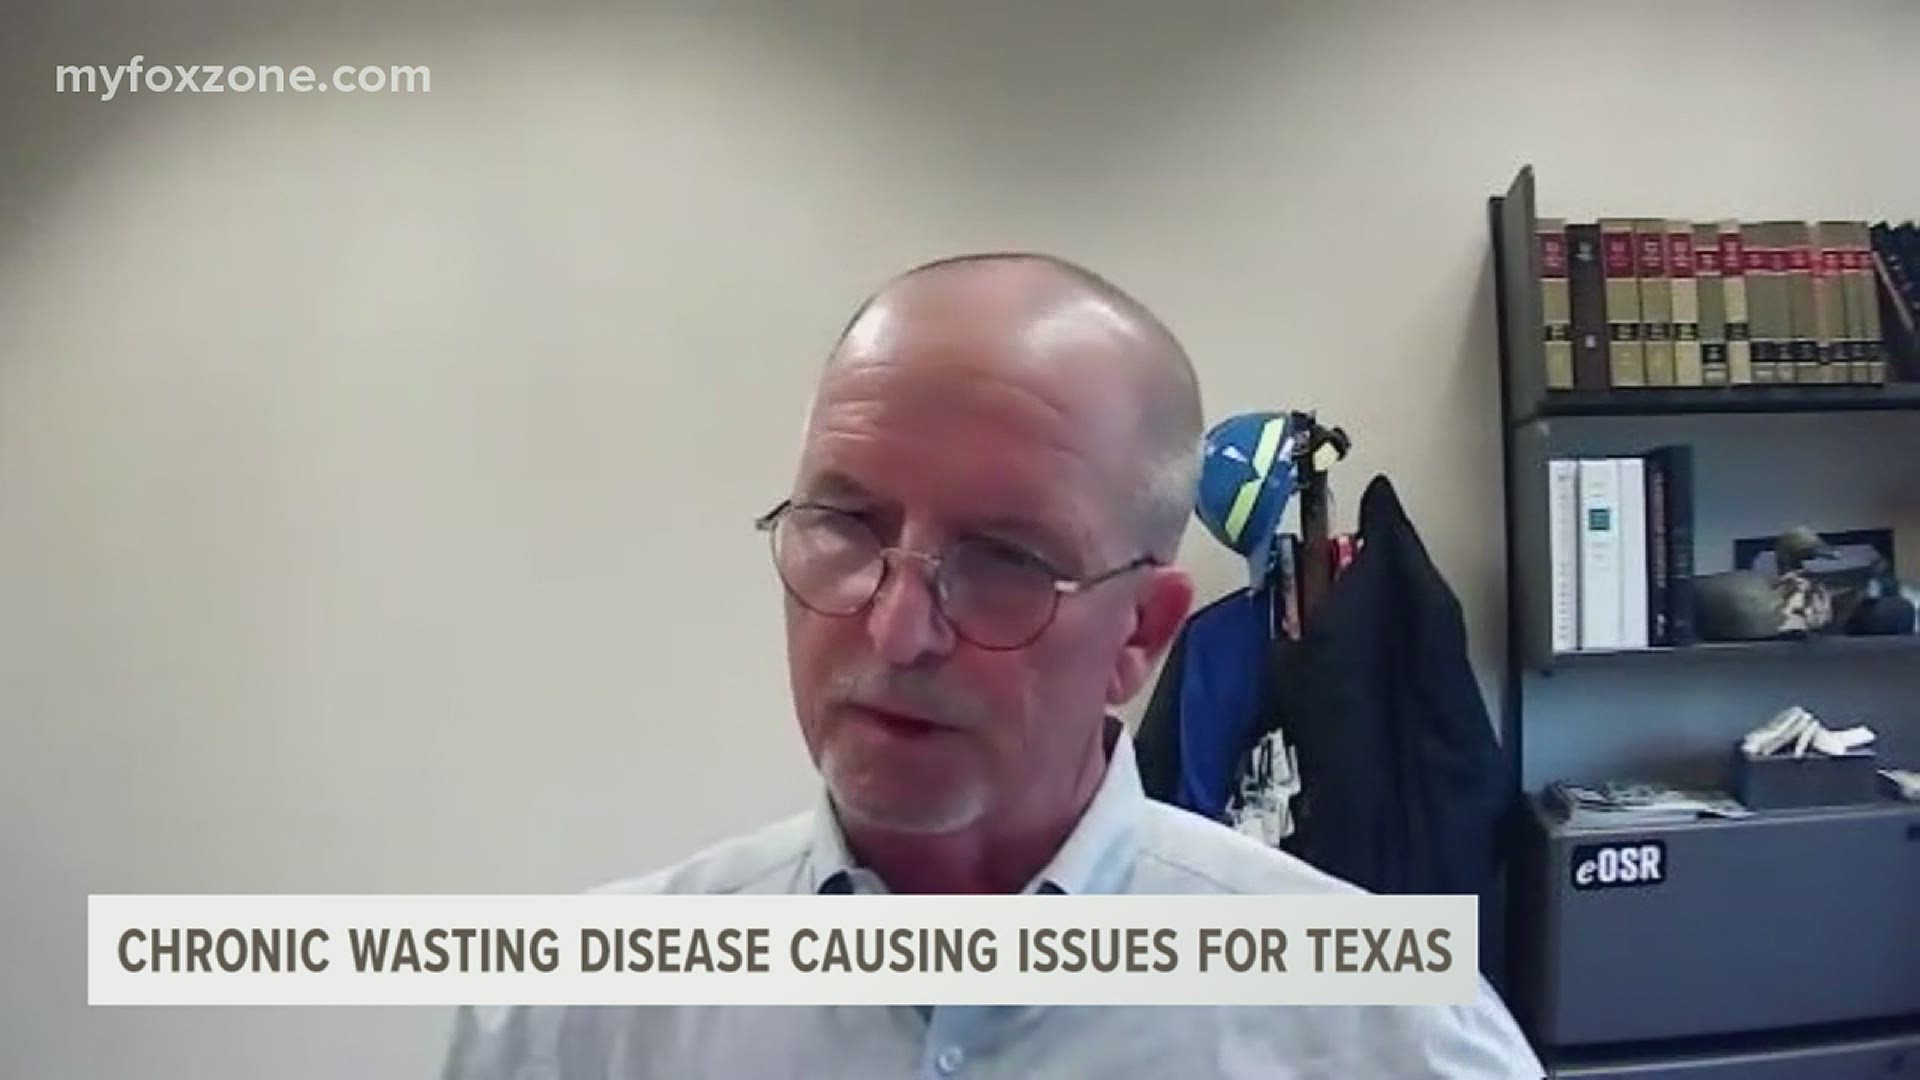 Texas Parks and Wildlife Department has recently seen an uptick in detection of chronic wasting disease, a brain disease that affects deer can be easily spread.